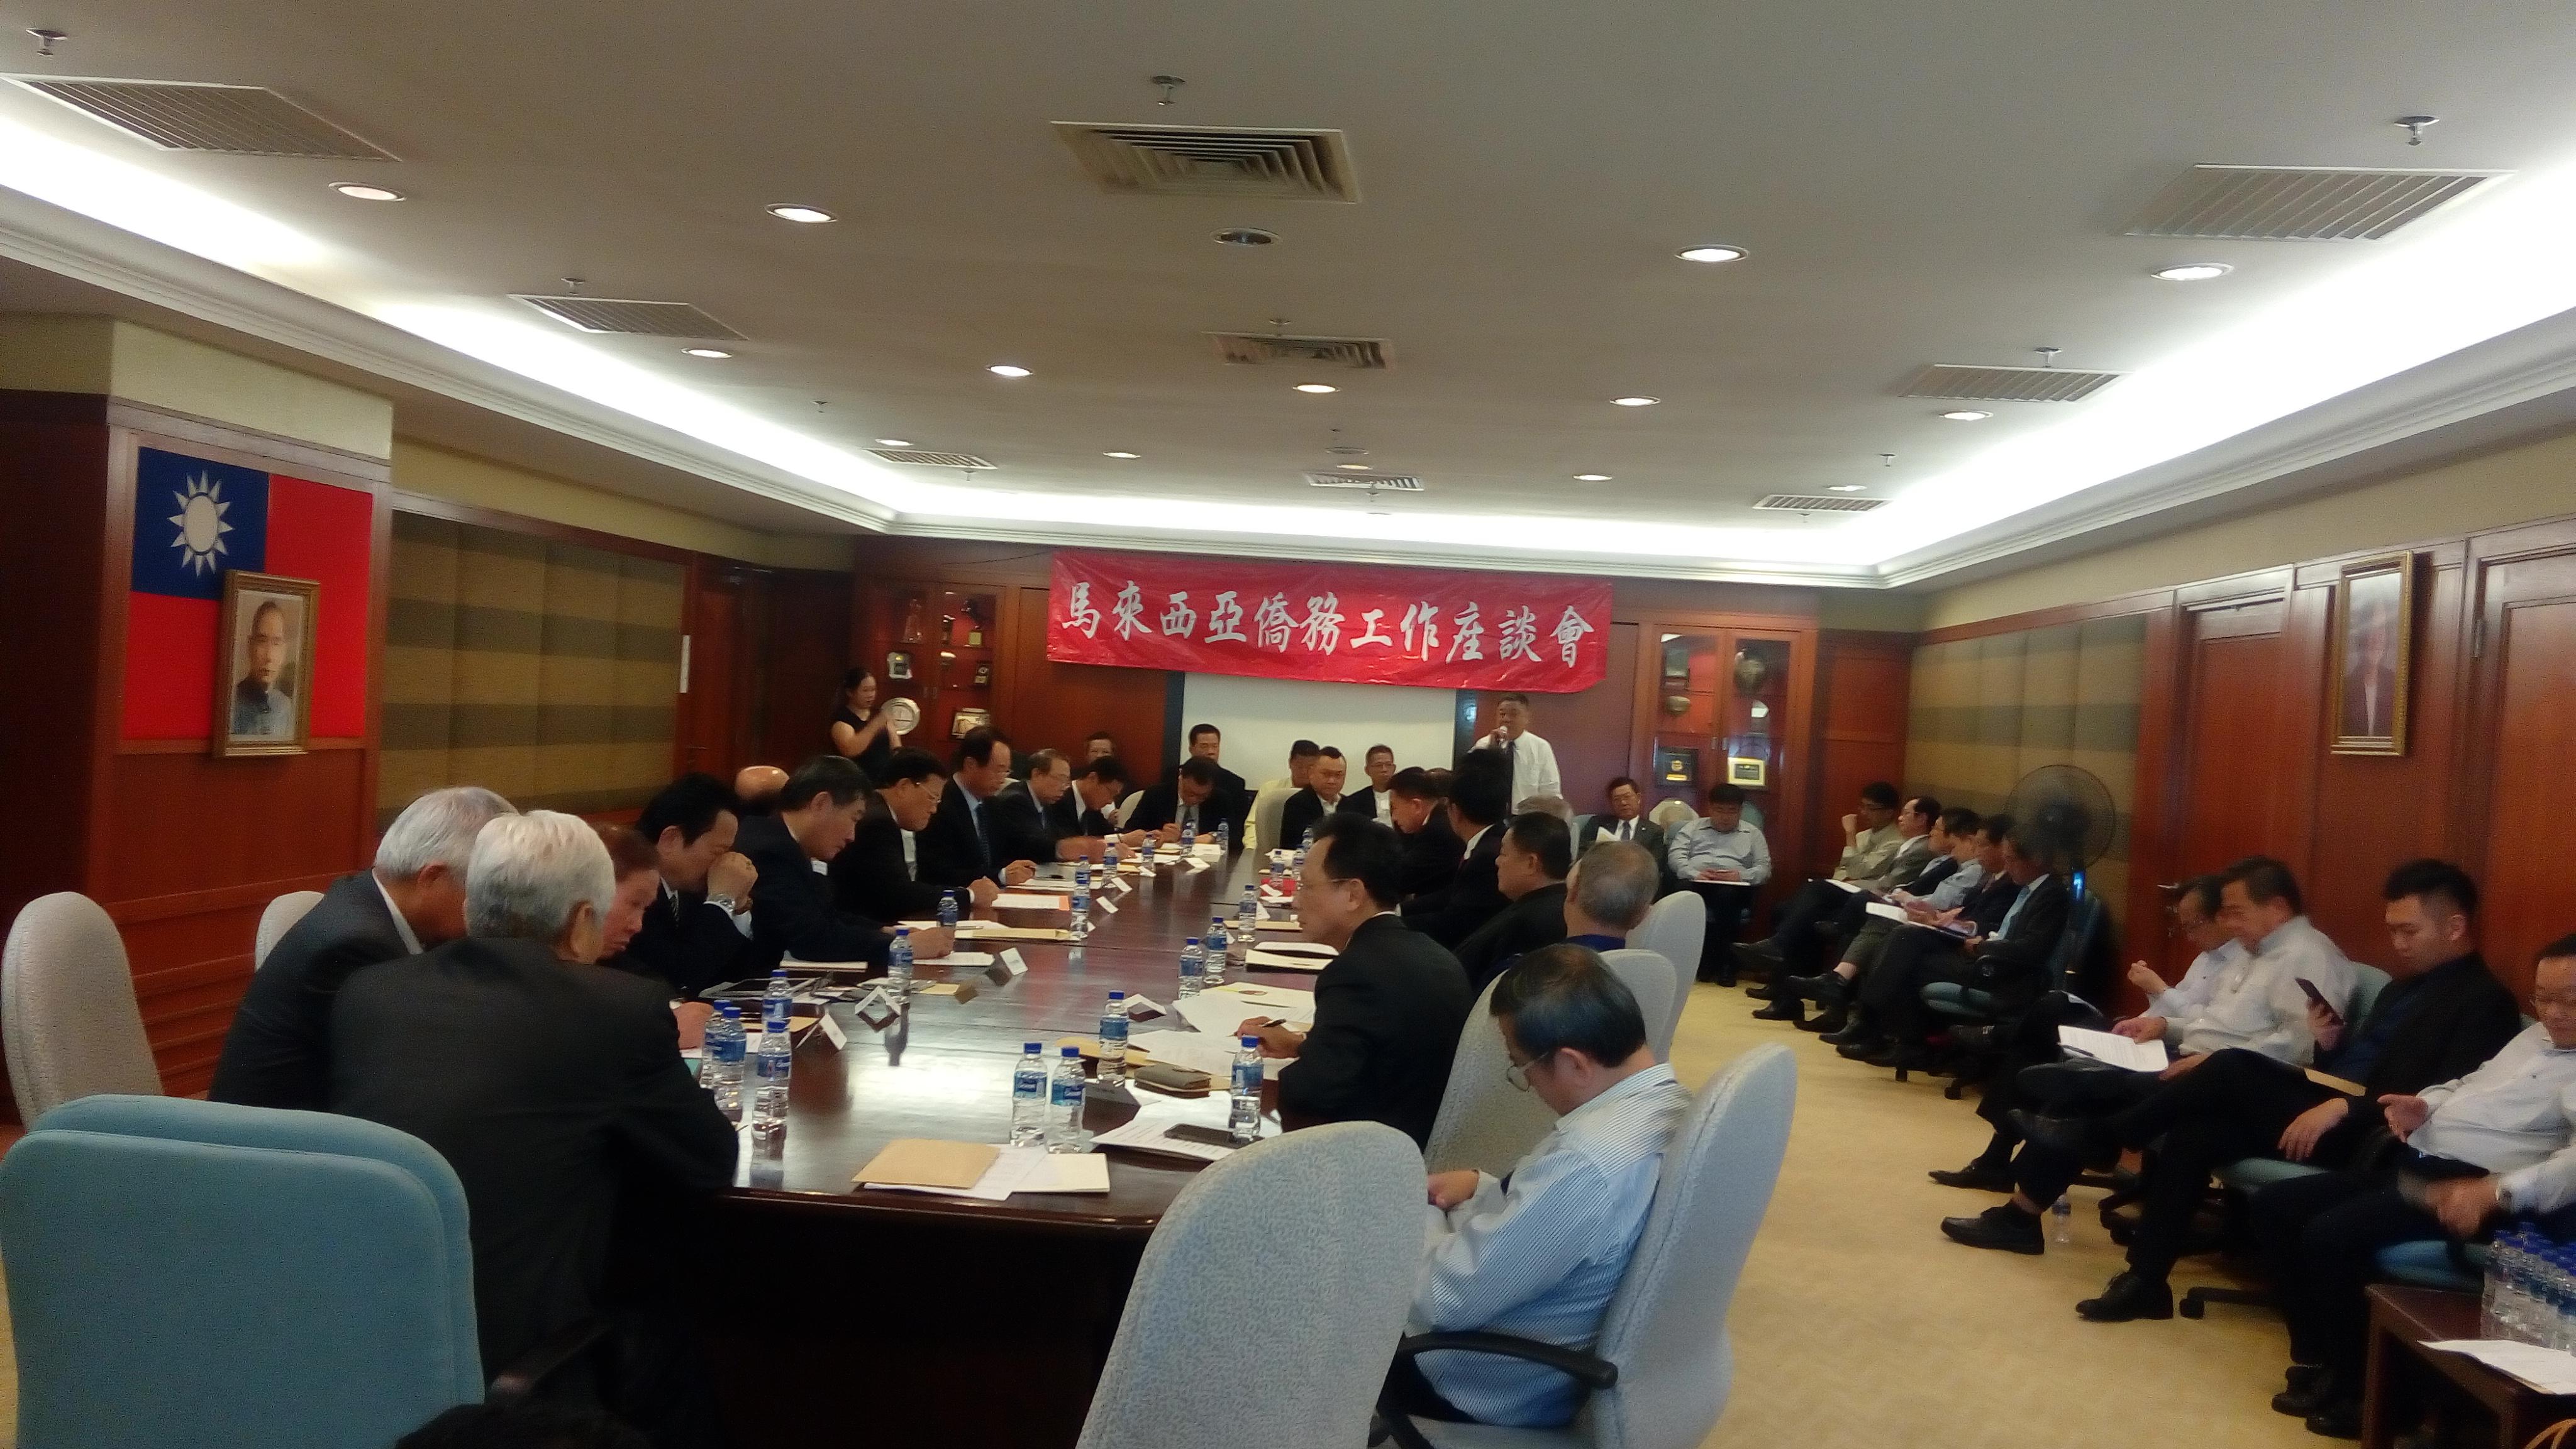 2017 Affairs Council Work forum meeting meet in the Taipei Economic and Cultural Office in Malaysia meeting room.